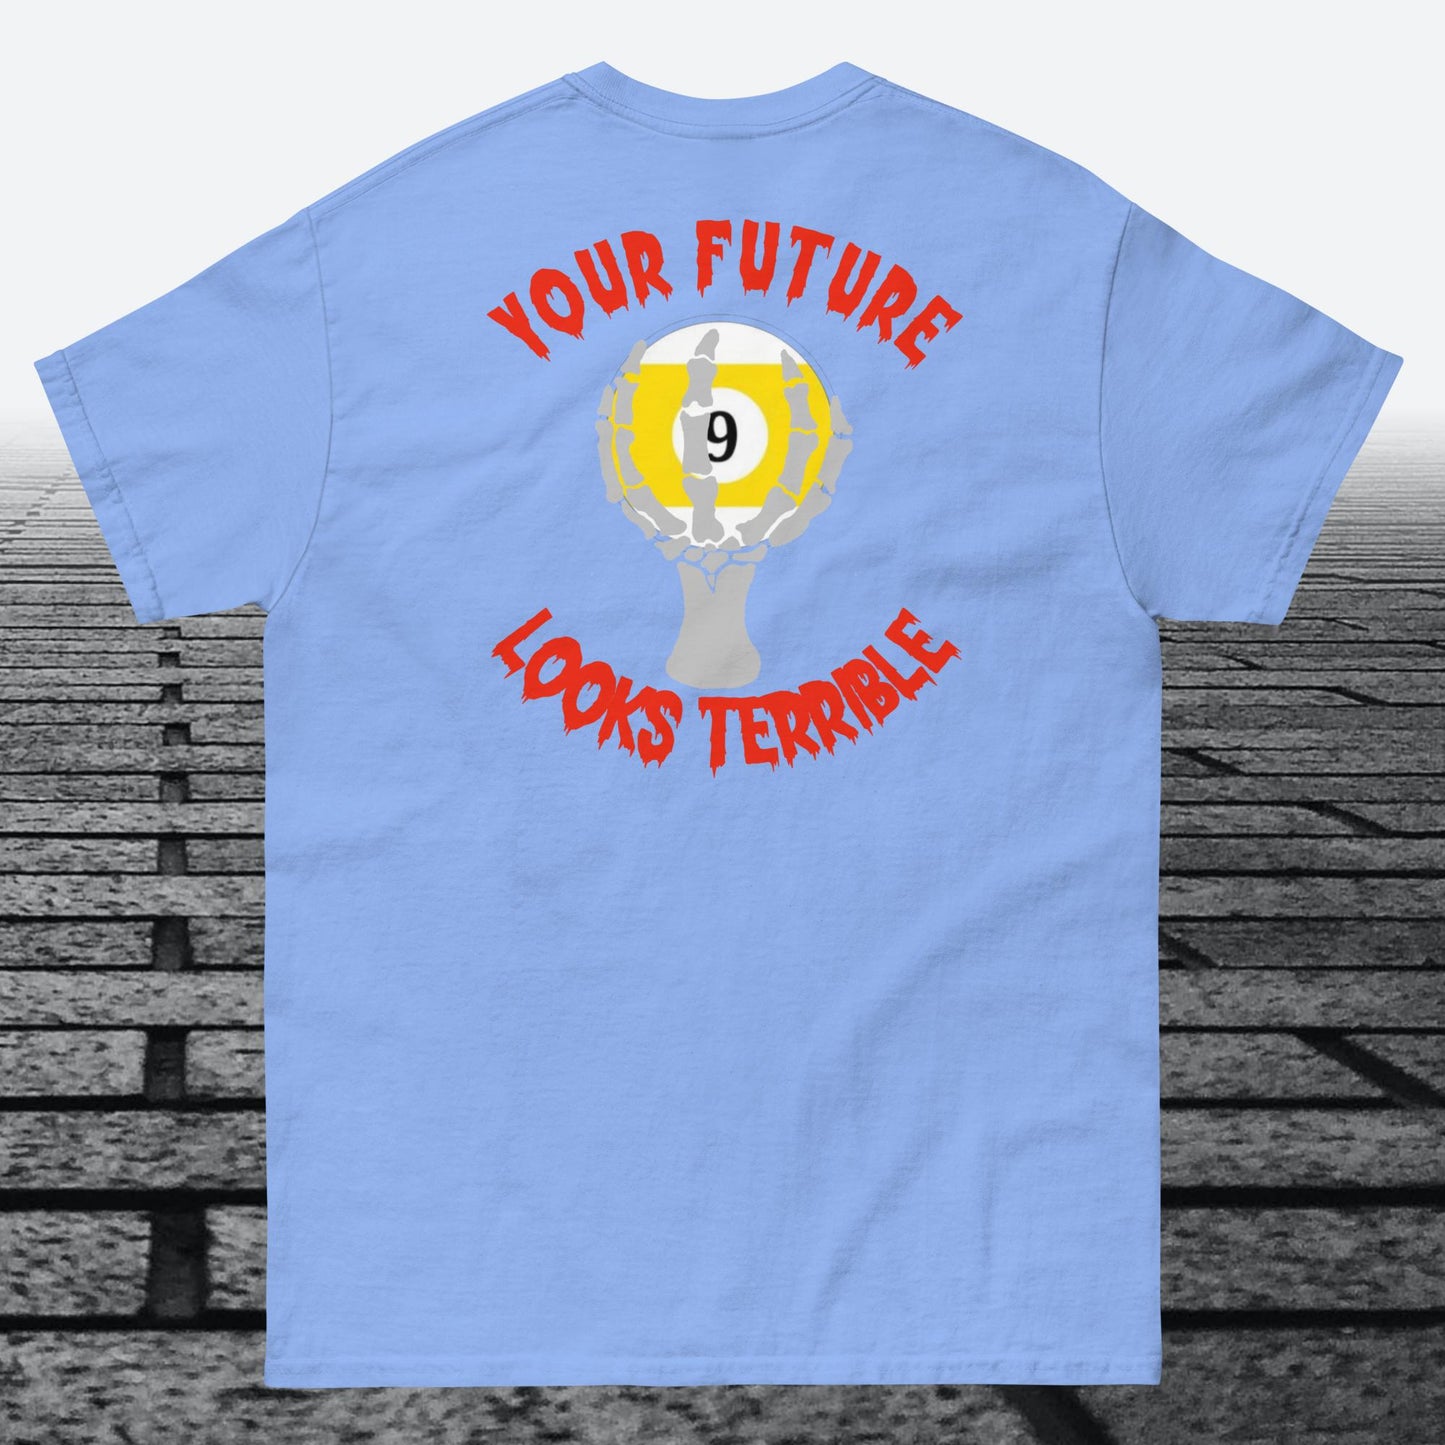 Your Future Looks Terrible with 9 ball, logo on front of shirt, Cotton Shirt